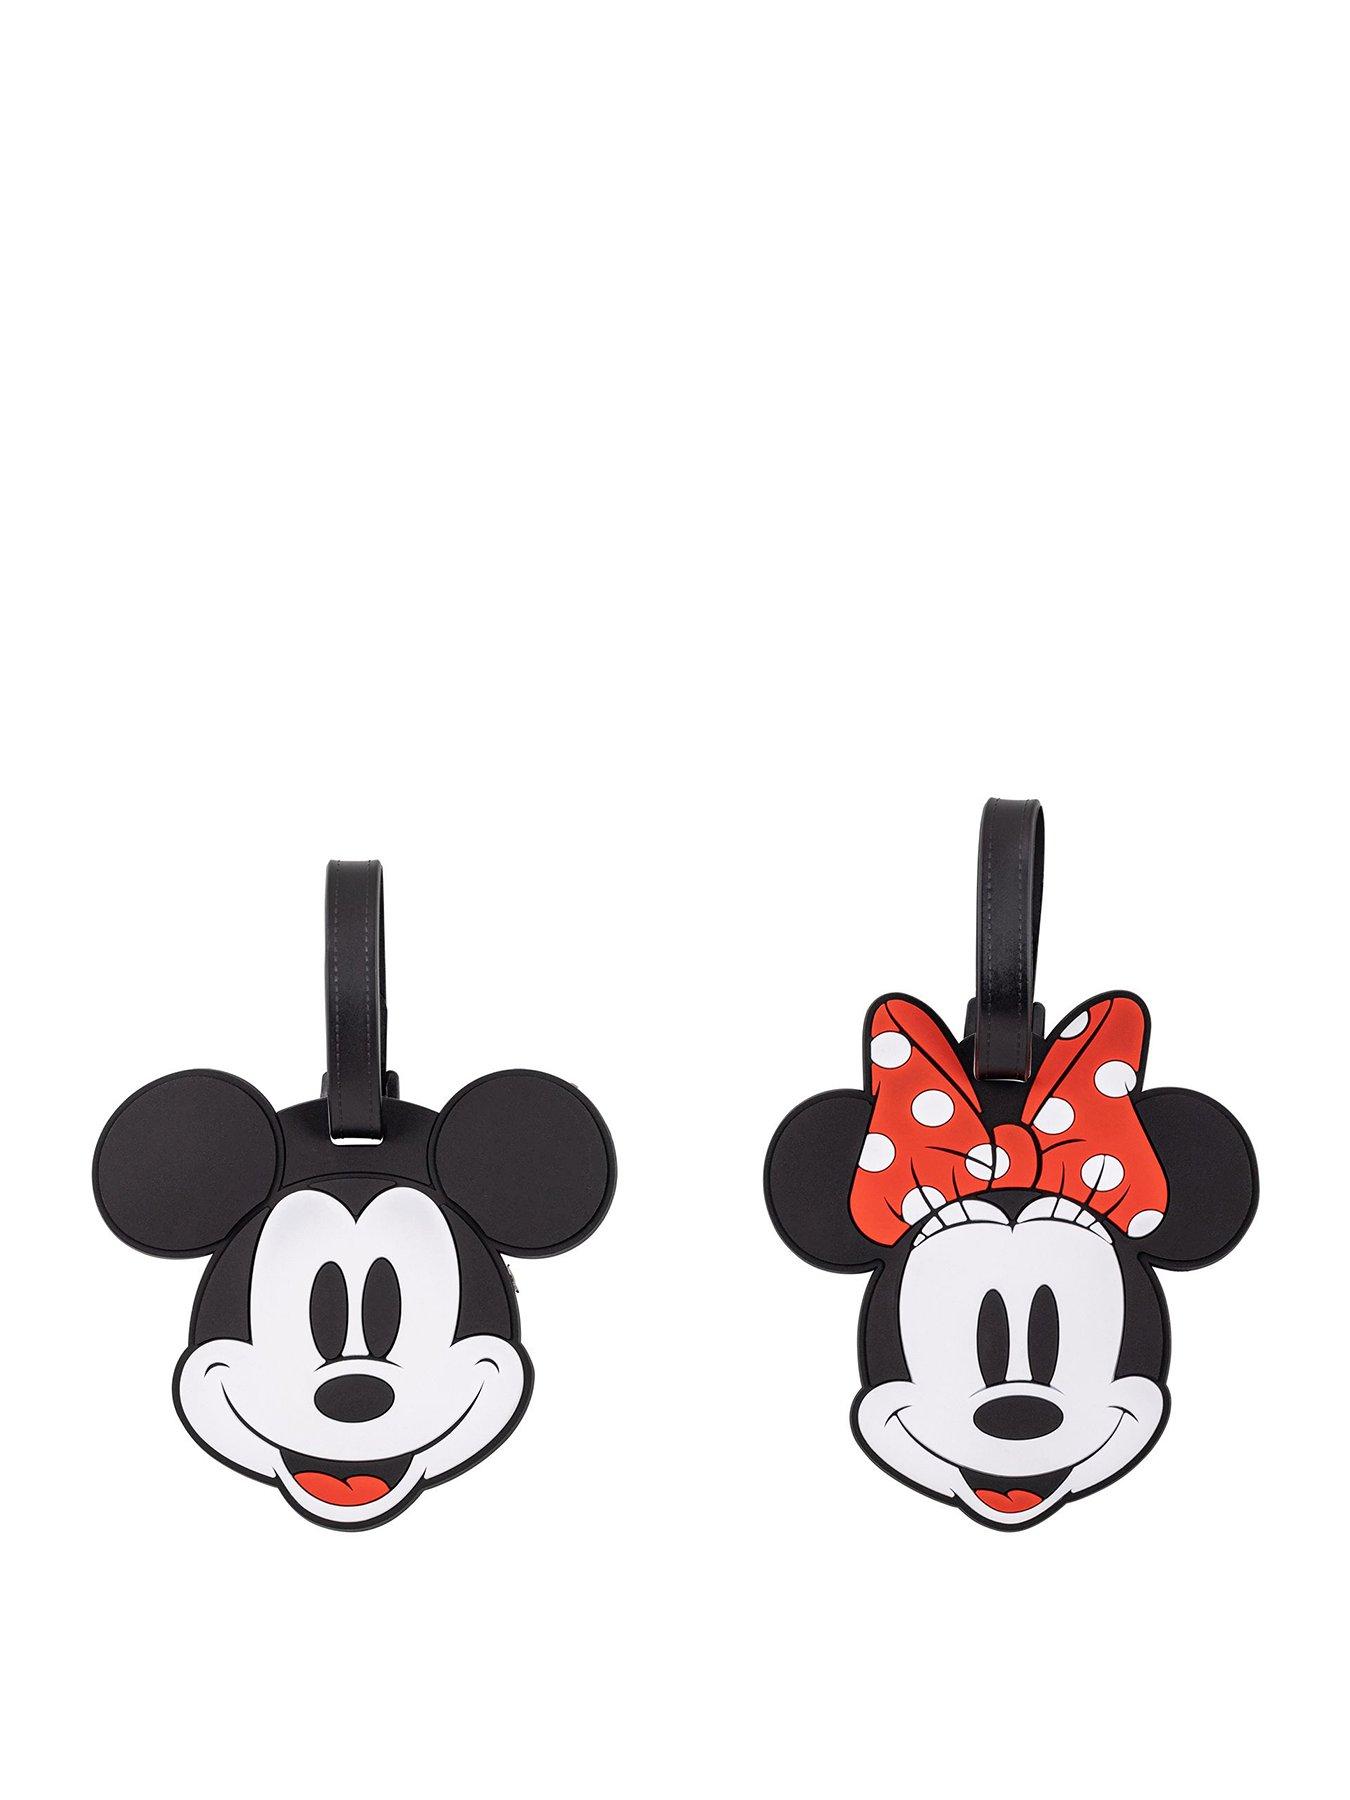 Disney Mickey And Minnie Mouse Red And Black 2 Piece Luggage Tag Set